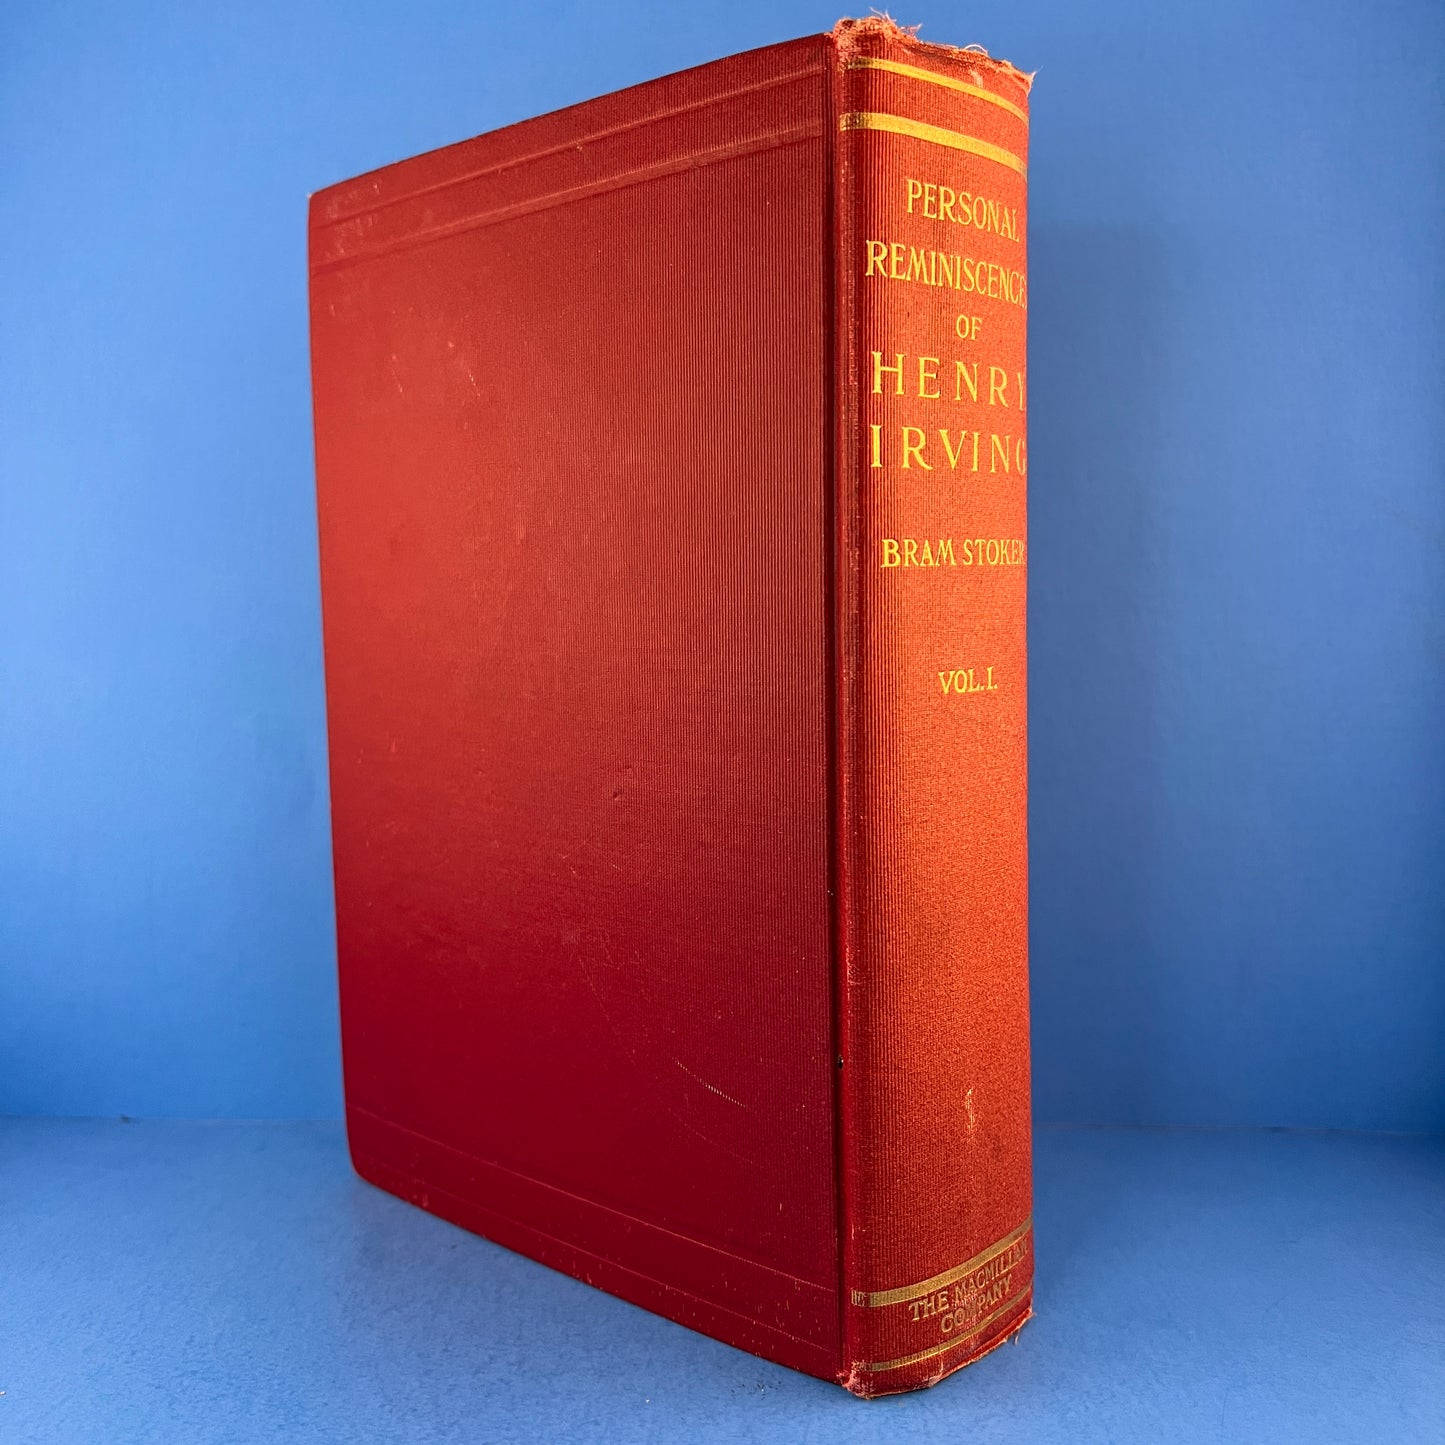 Personal Reminiscences of Henry Irving, Volume I